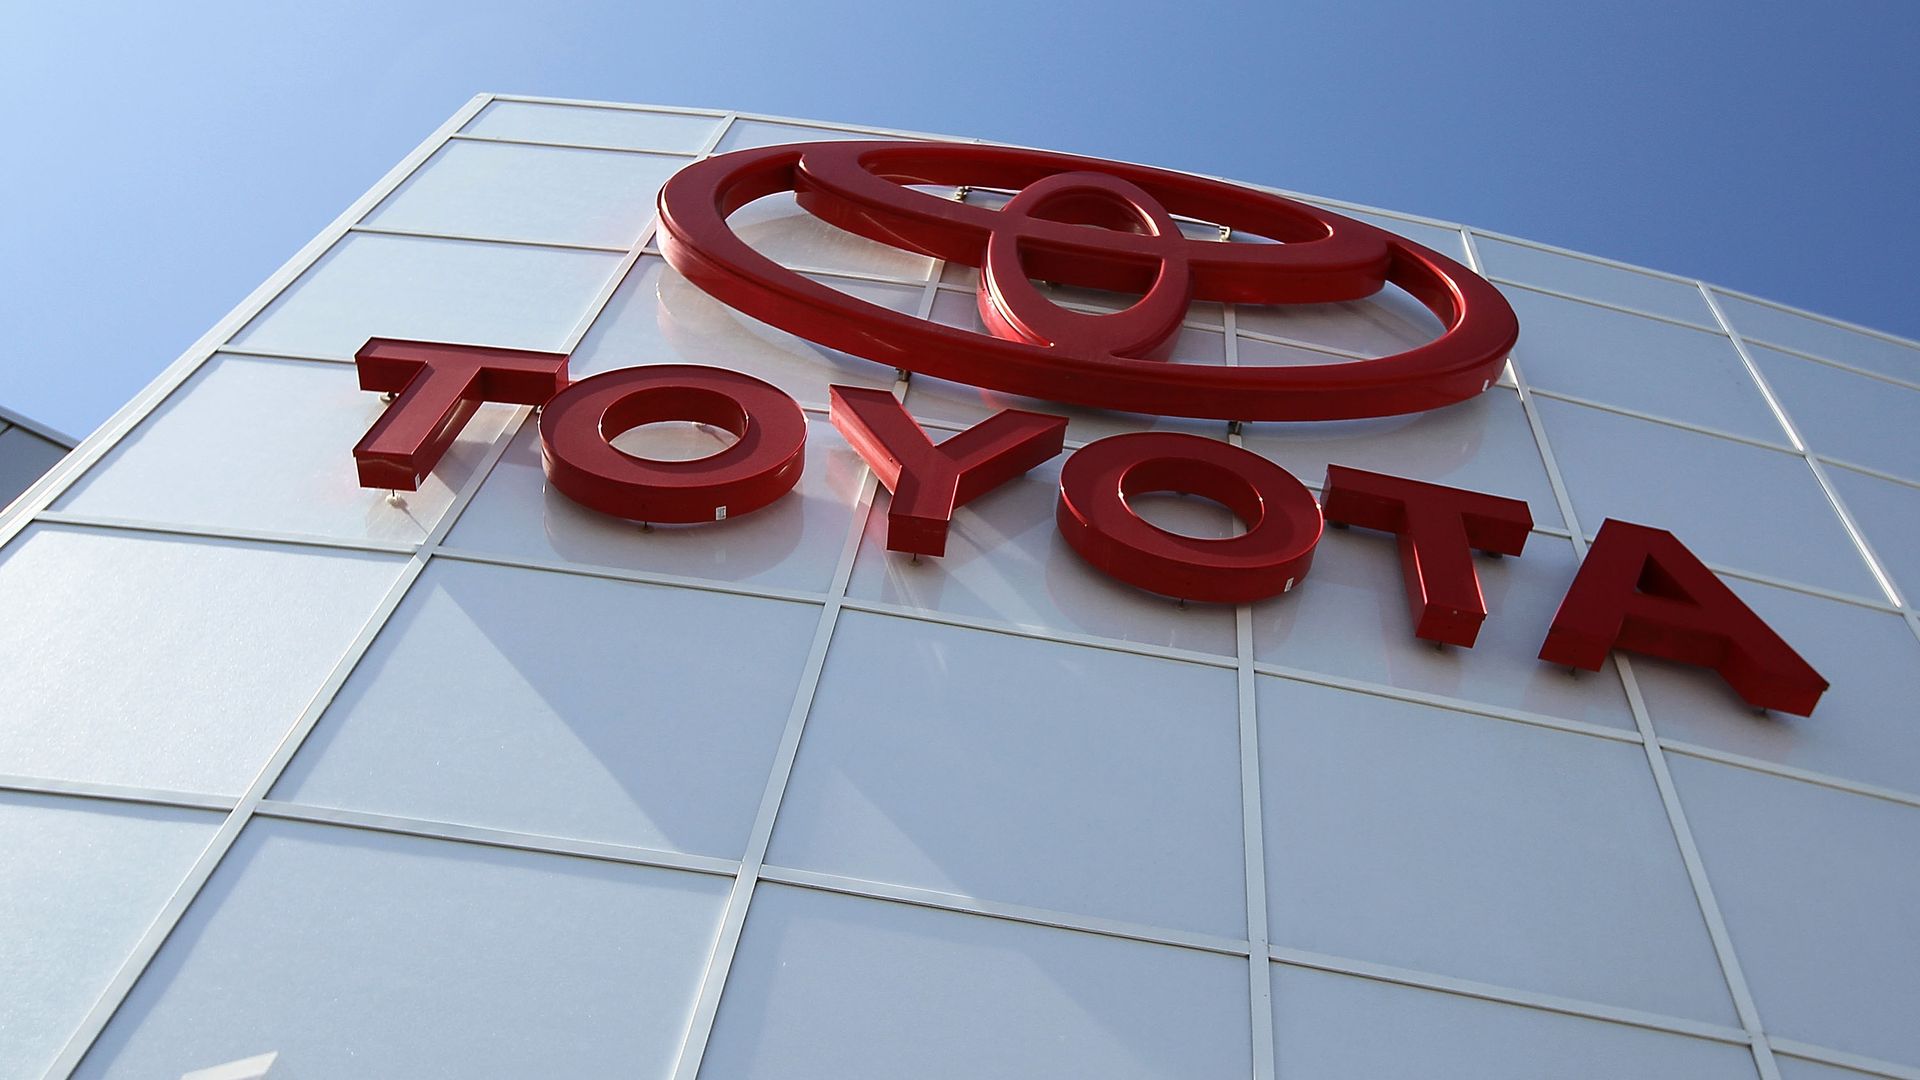 The Toyota logo is displayed on the exterior of City Toyota May 11, 2010 in Daly City, California. (Photo by Justin Sullivan/Getty Images)